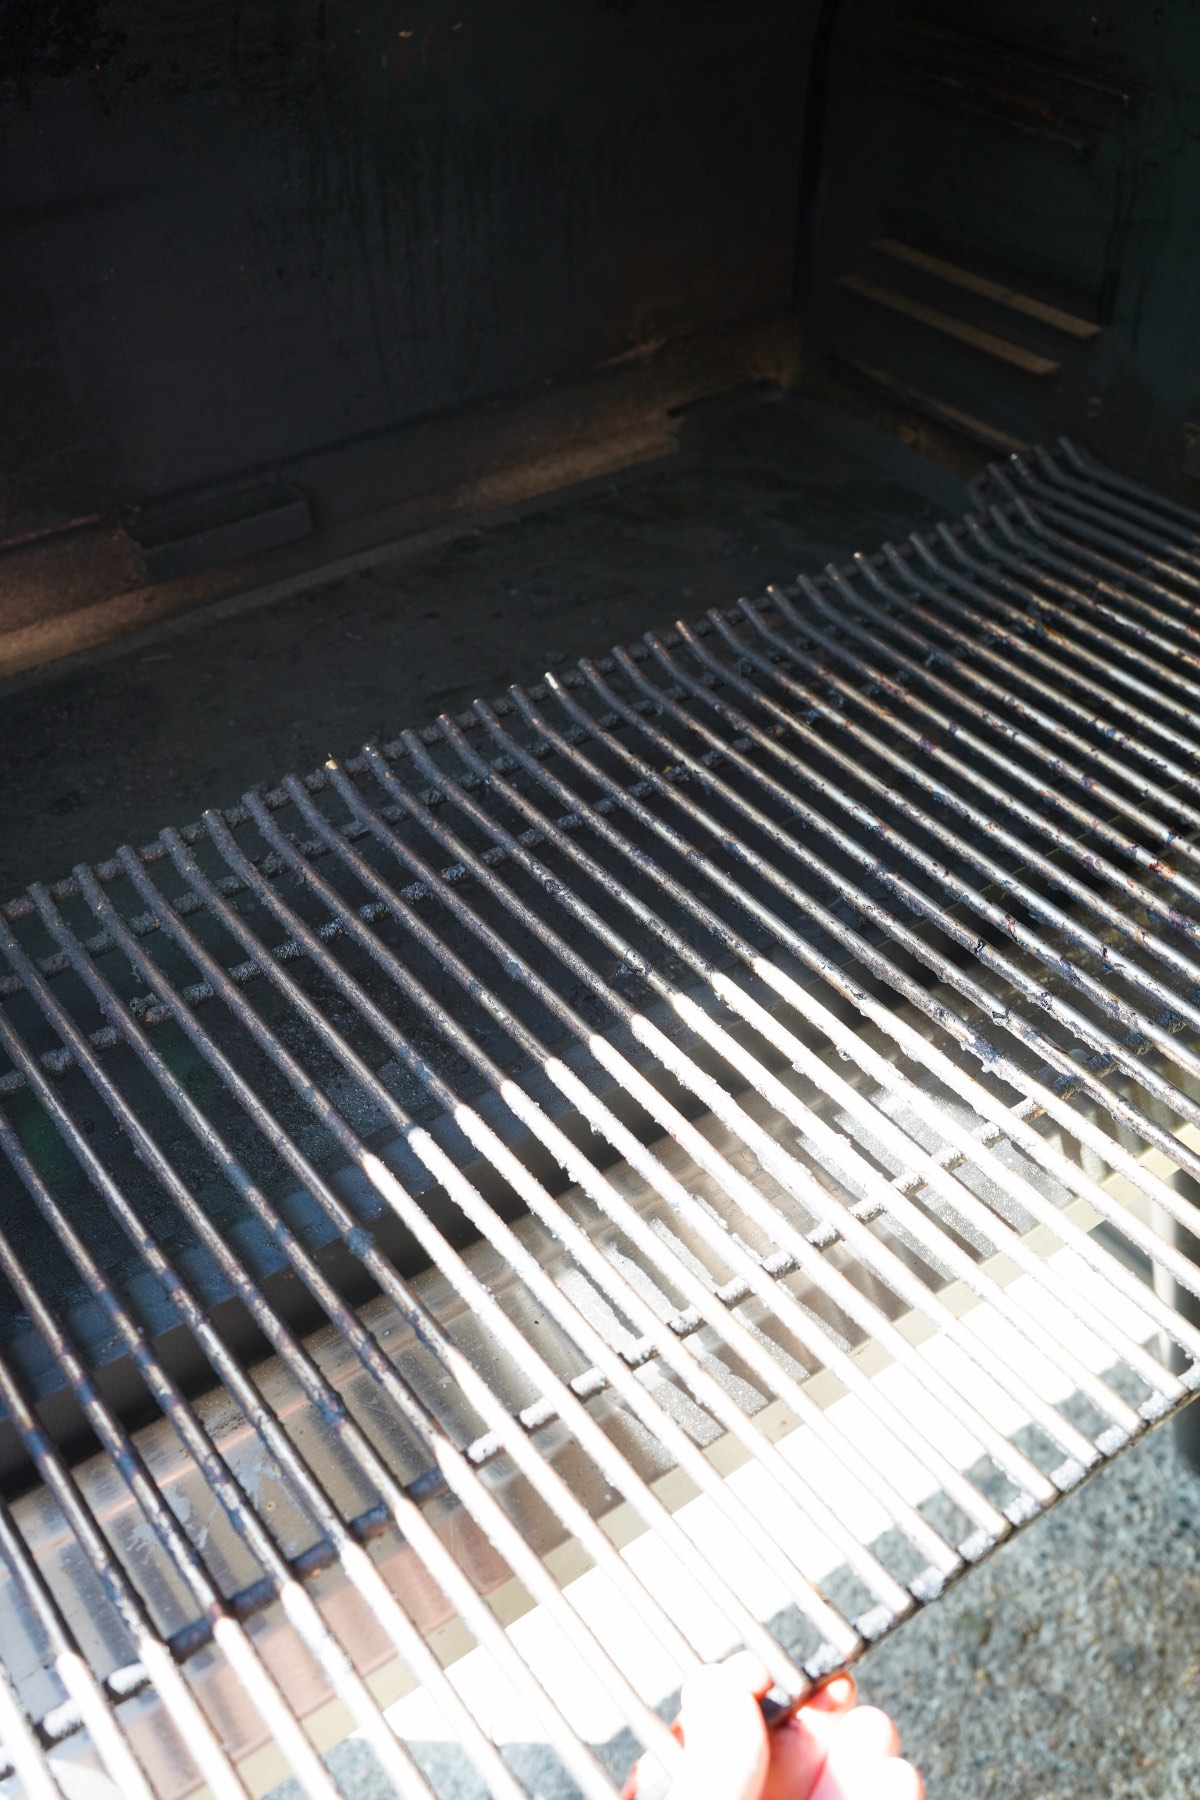 Grill Grates being removed